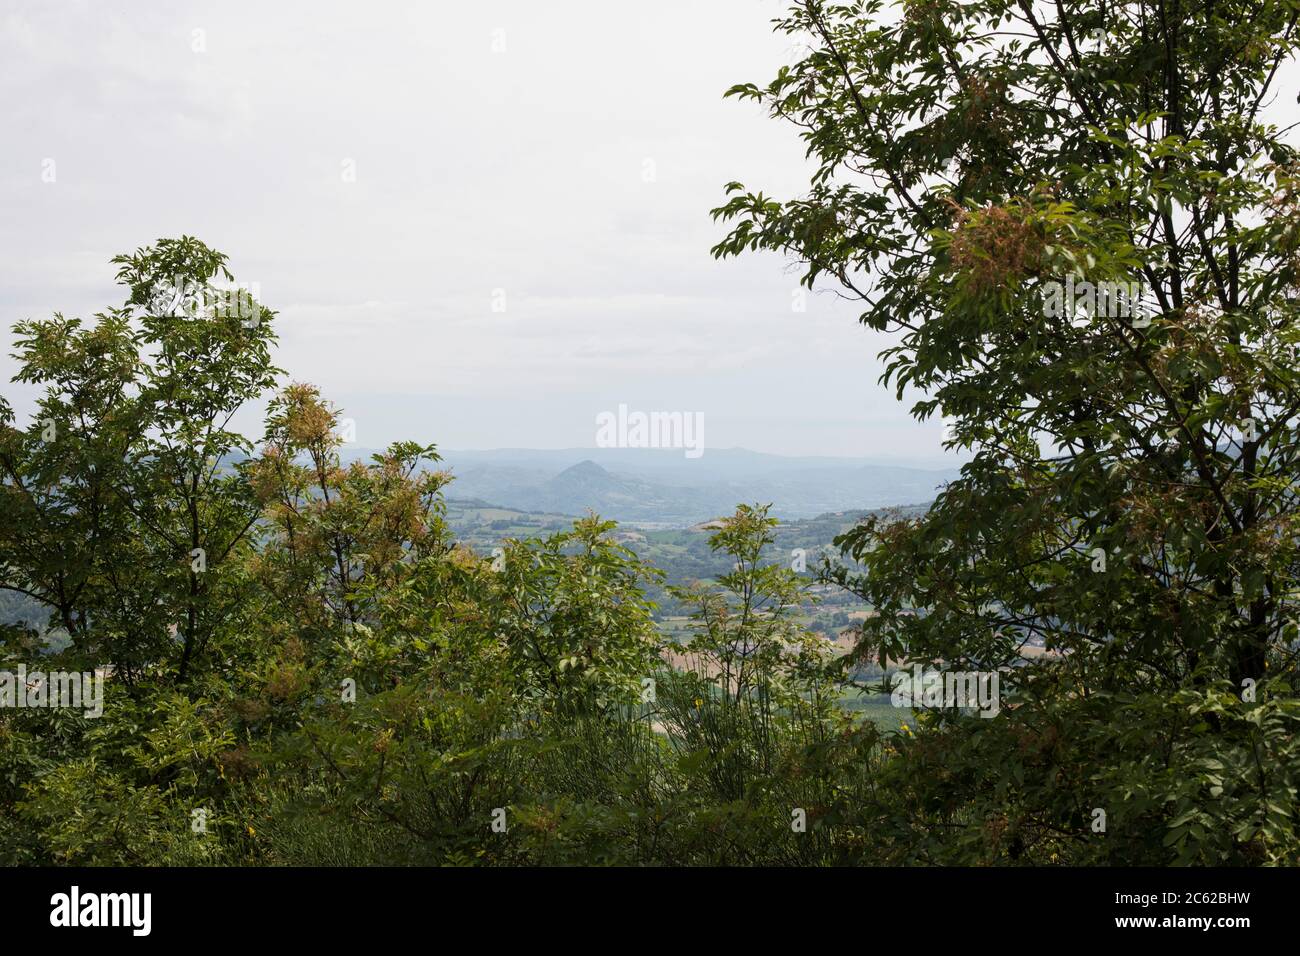 Scenica view of Bormida Valley from the hills near Sessame, Piedmont, Italy Stock Photo